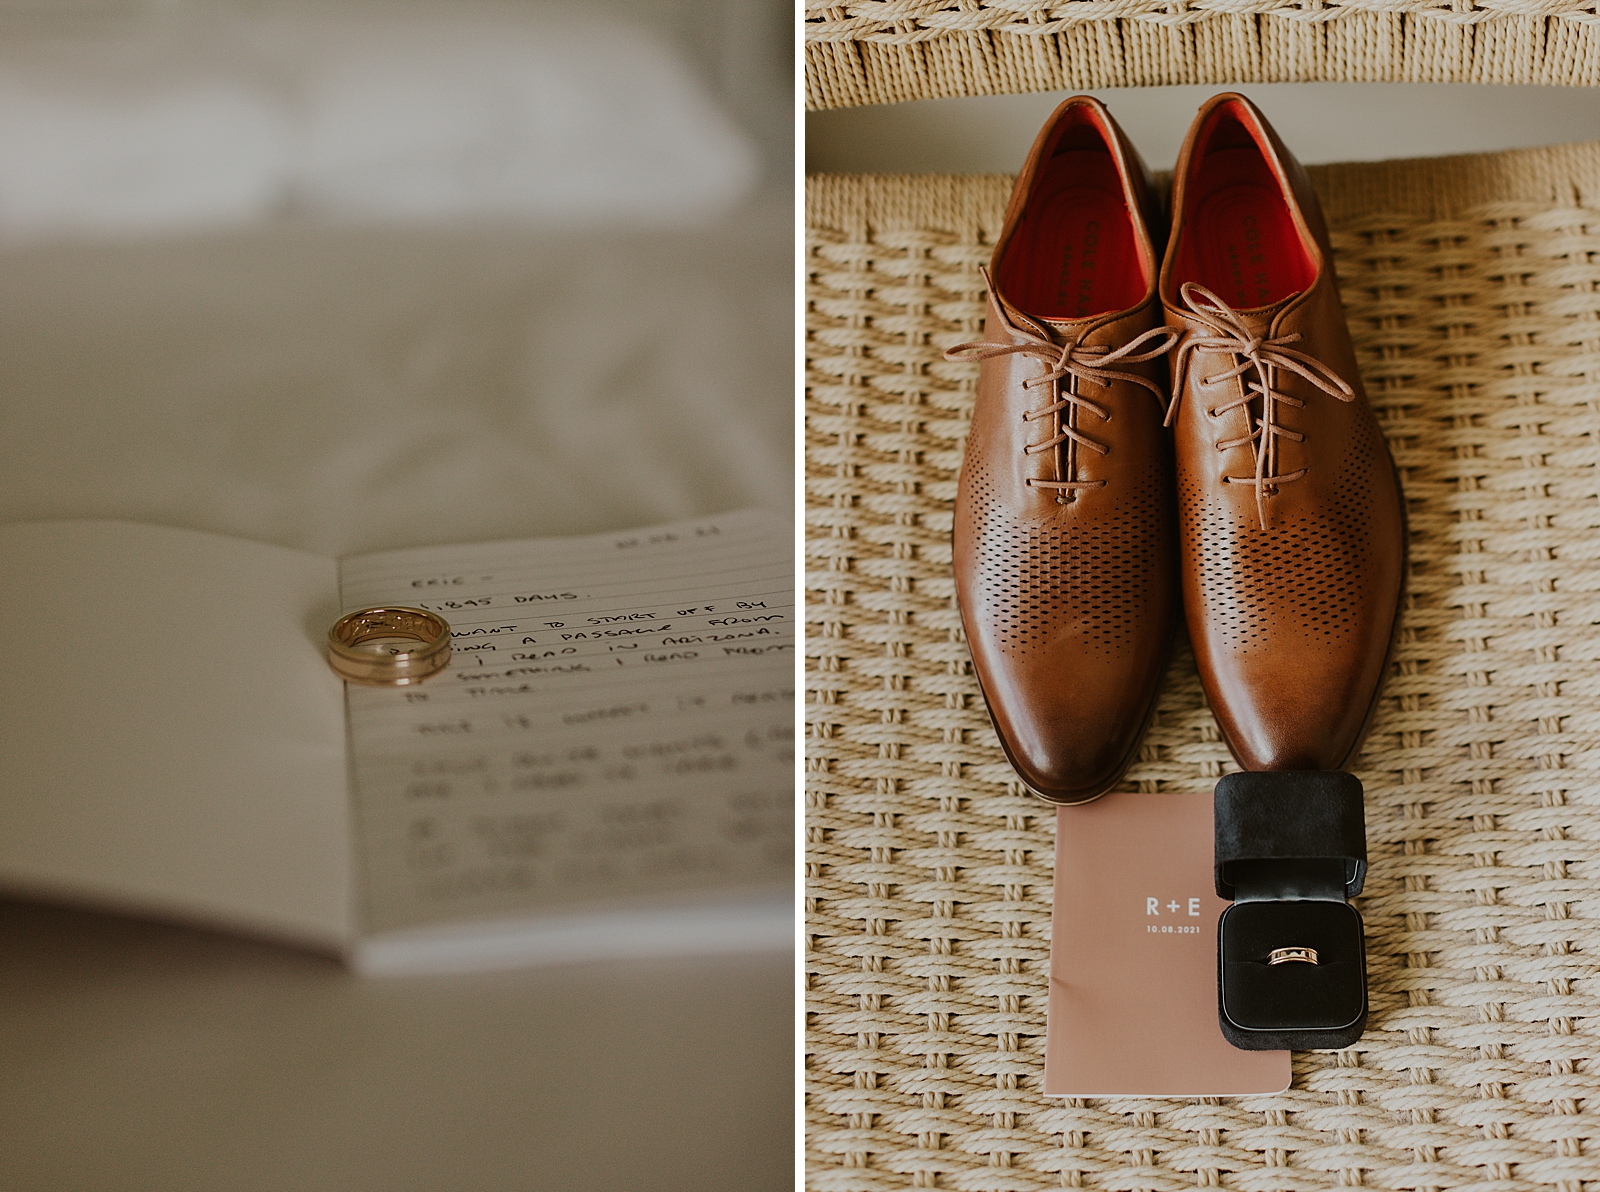 Detail shot of wedding band on vows book and Groom's shoes and wedding band in box